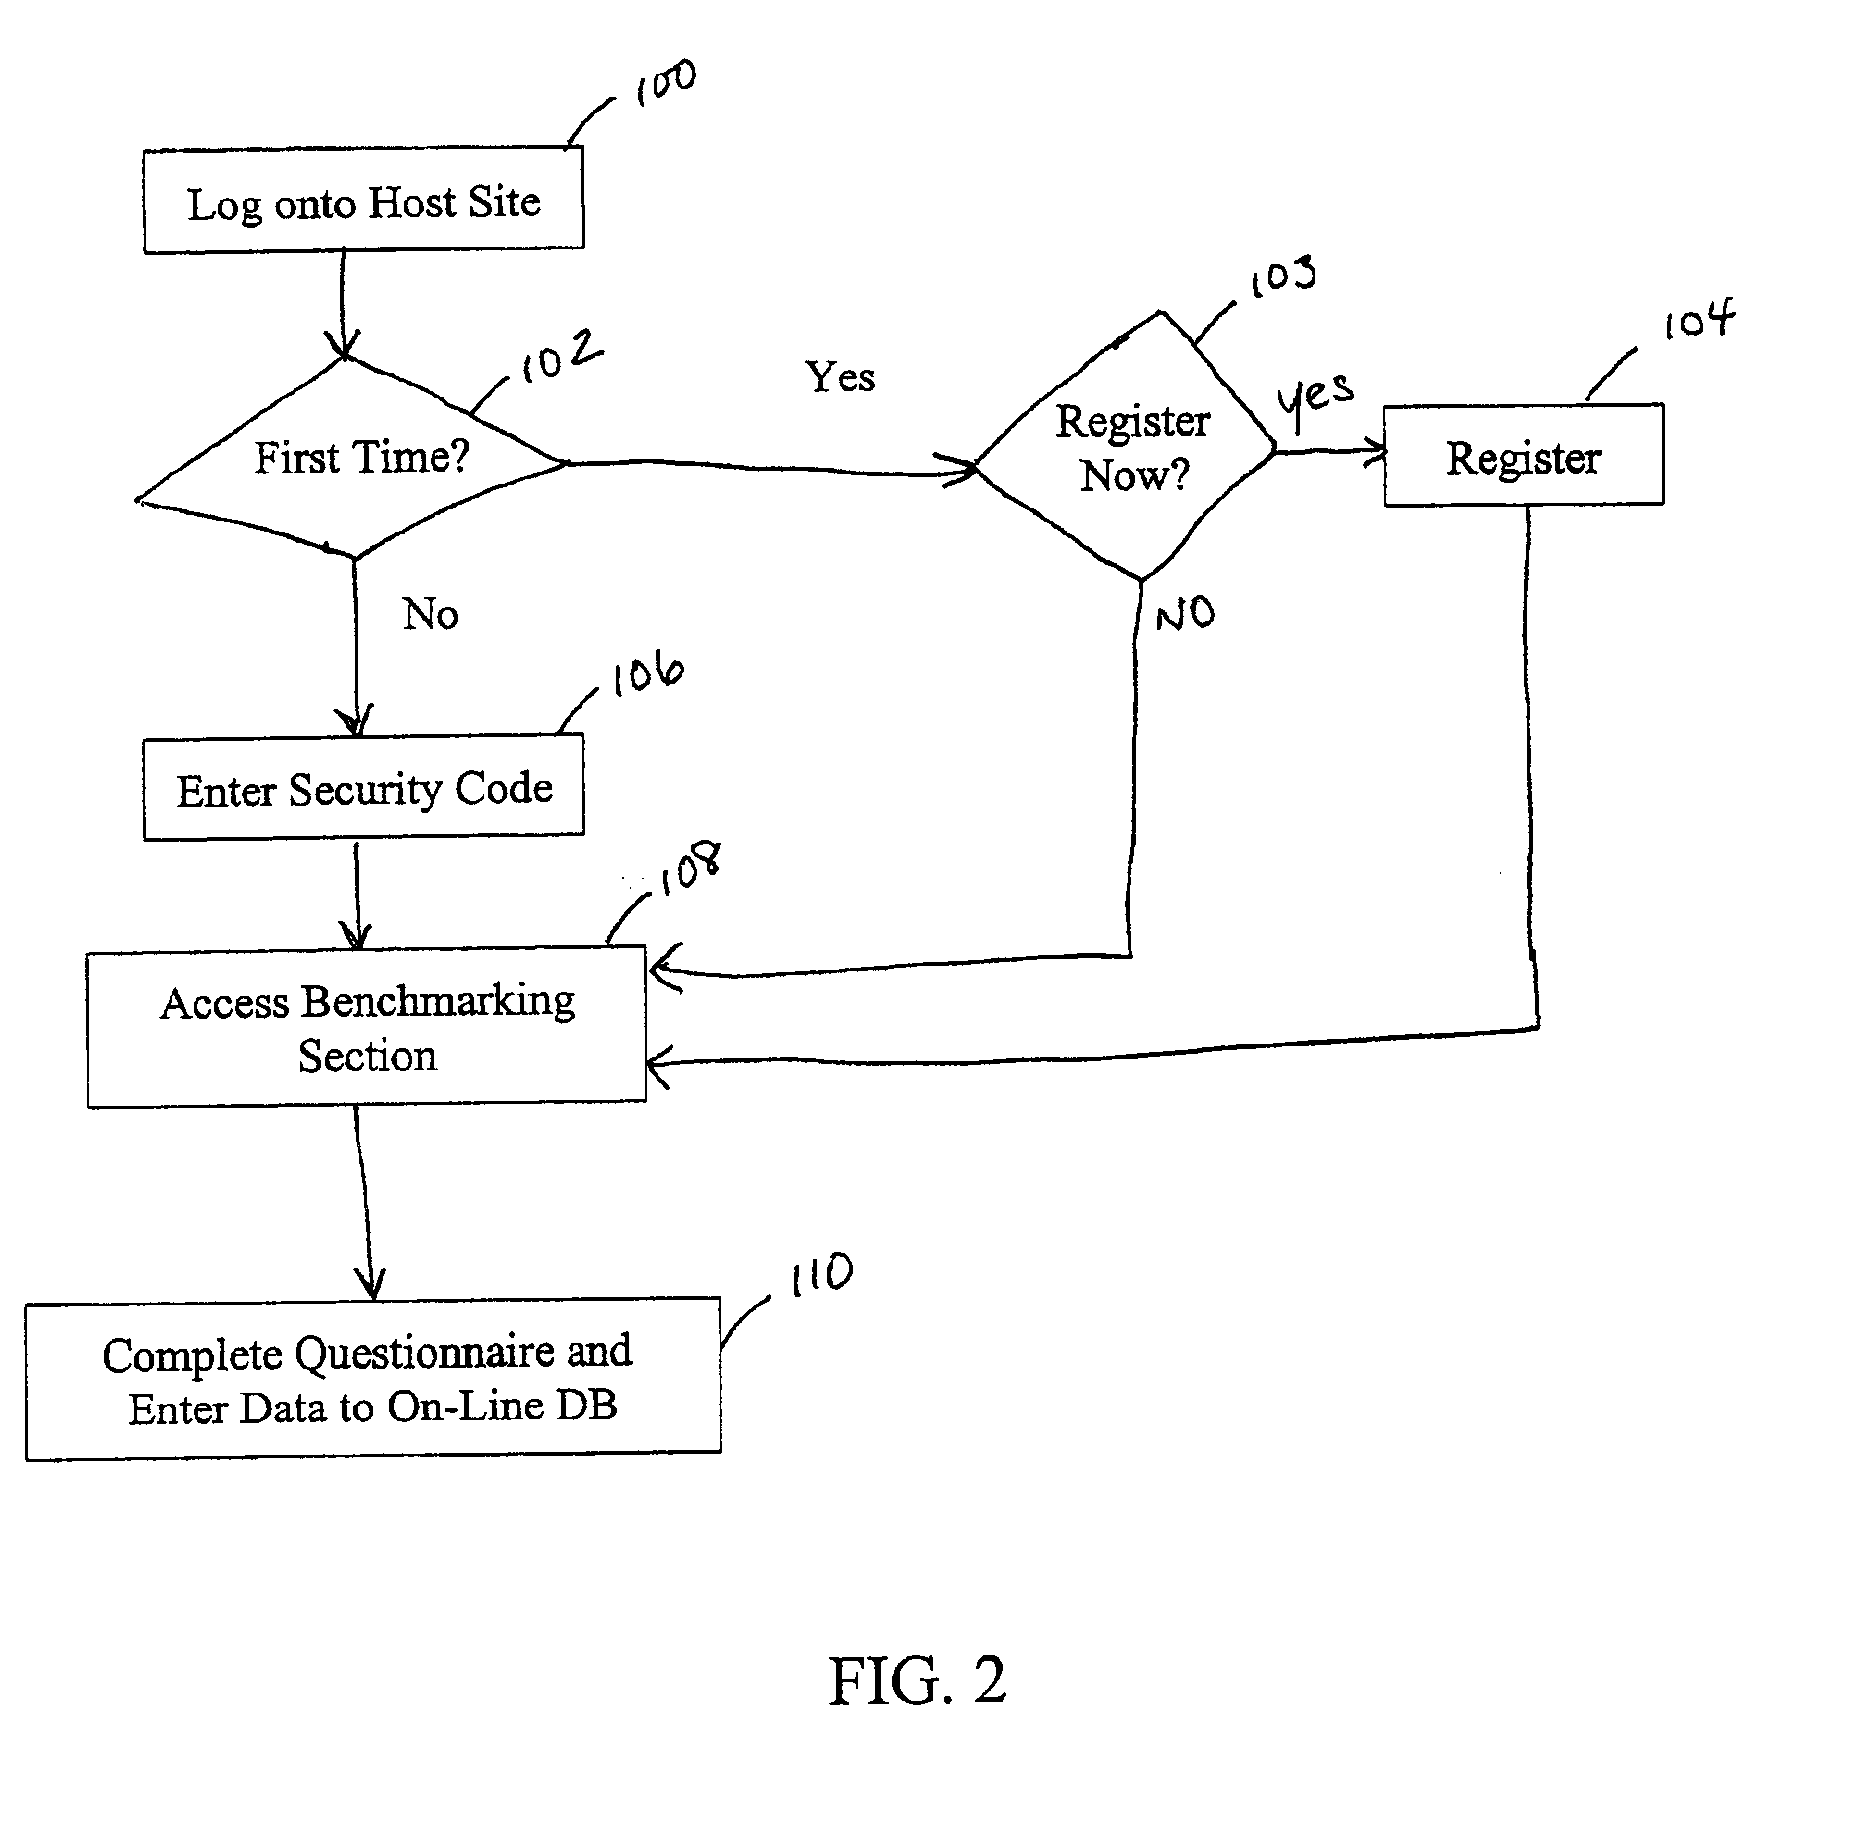 Performance evaluation through benchmarking using an on-line questionnaire based system and method